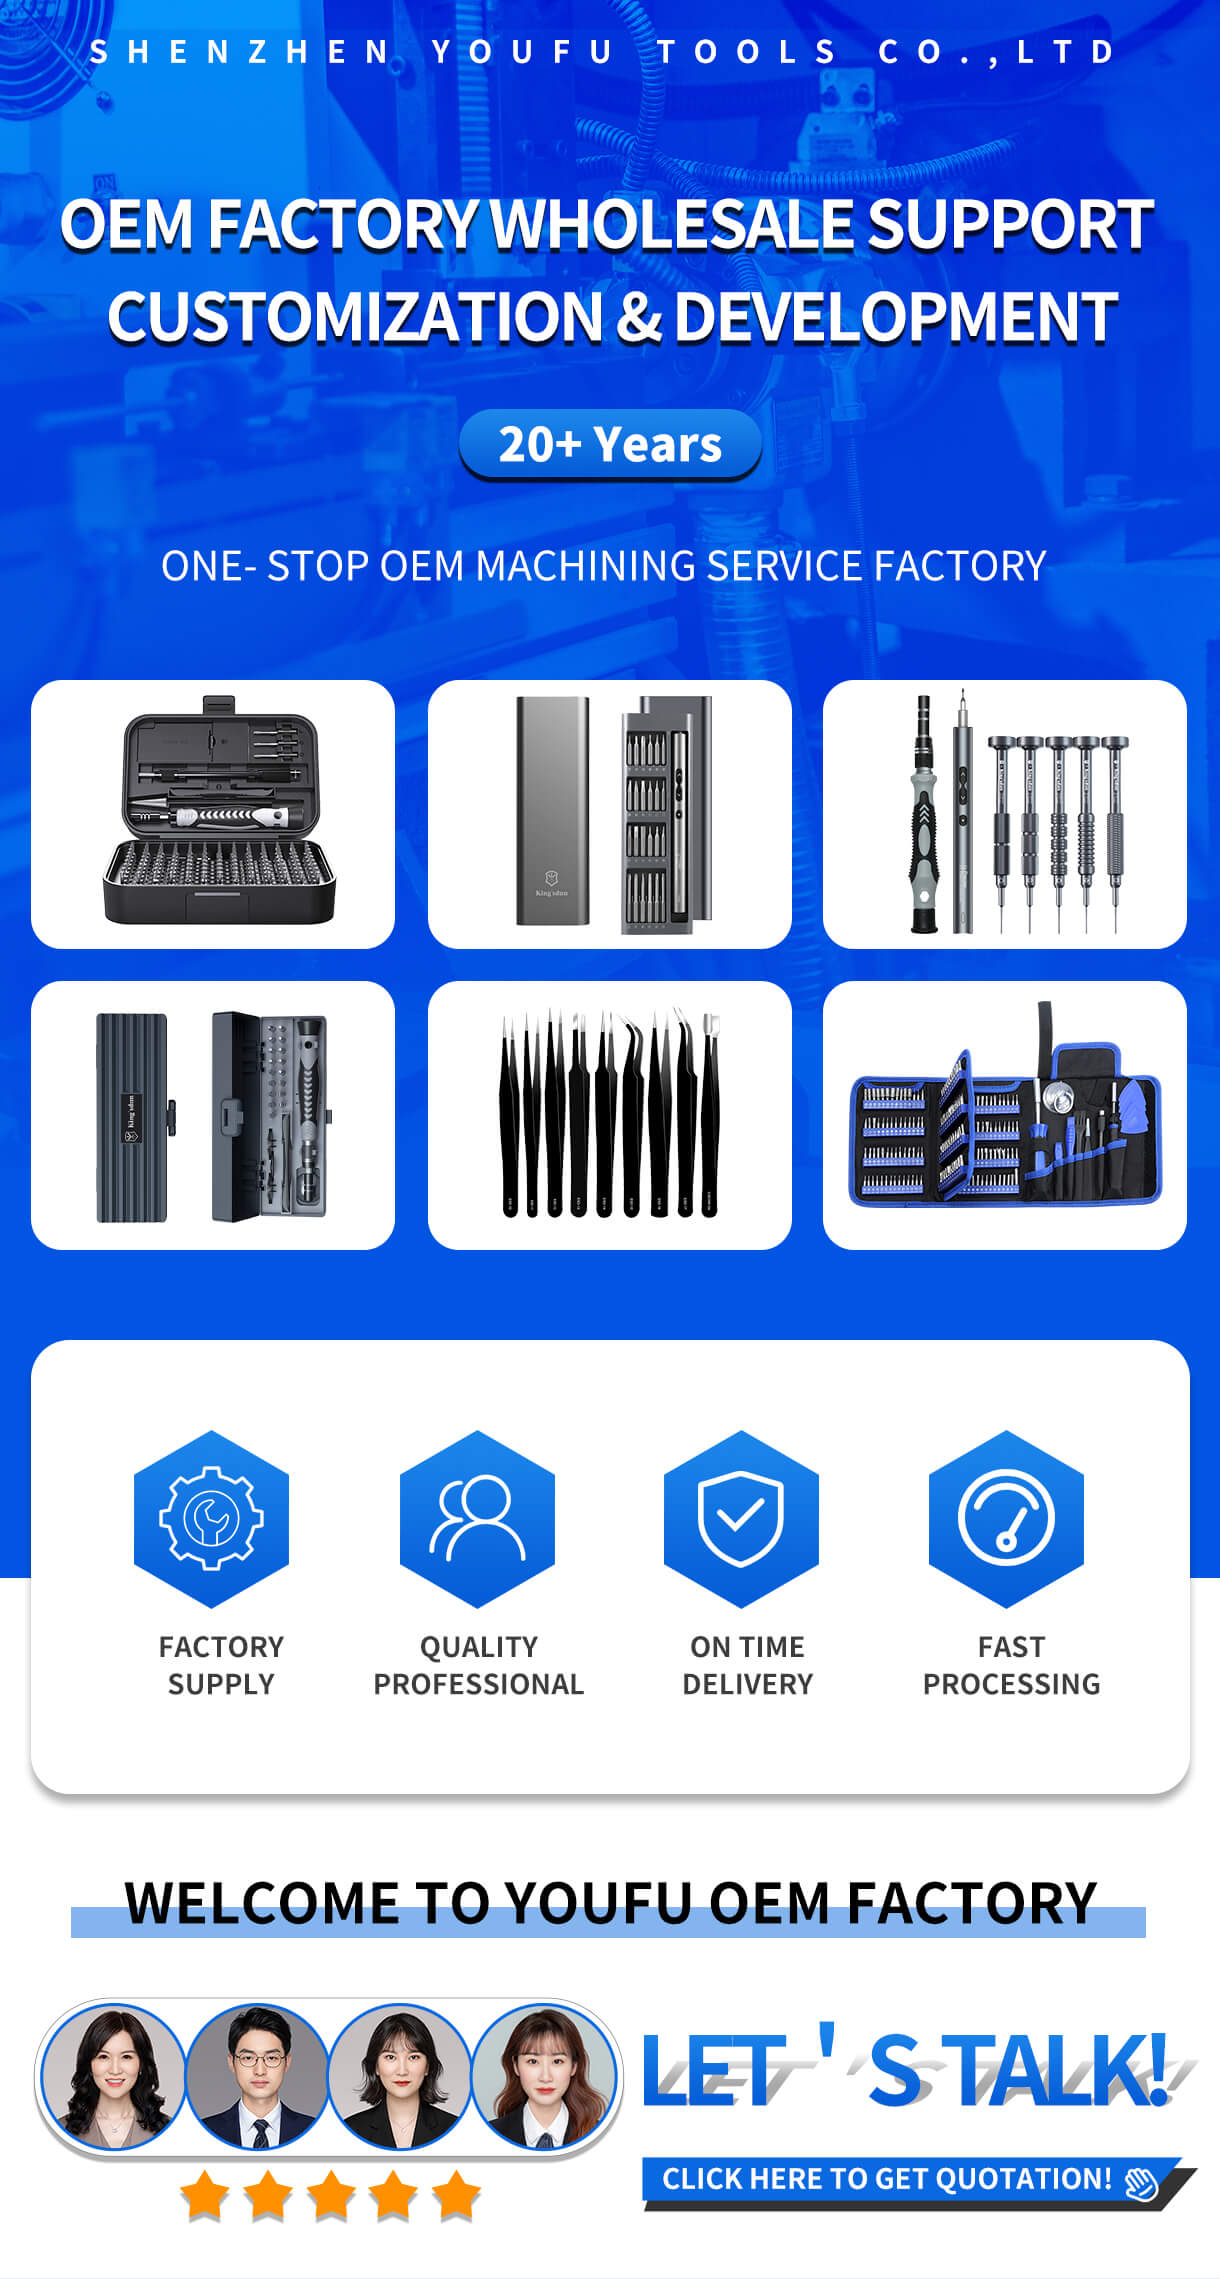 1. Multi-function ratchet wrench screwdriver, free to change, adapt to more occasions. The cramped space, deep cavity structure,everything is handy.2.24 S2 bits, with the continuous heat-treatment process. Hard but not brittle, full of toughness.